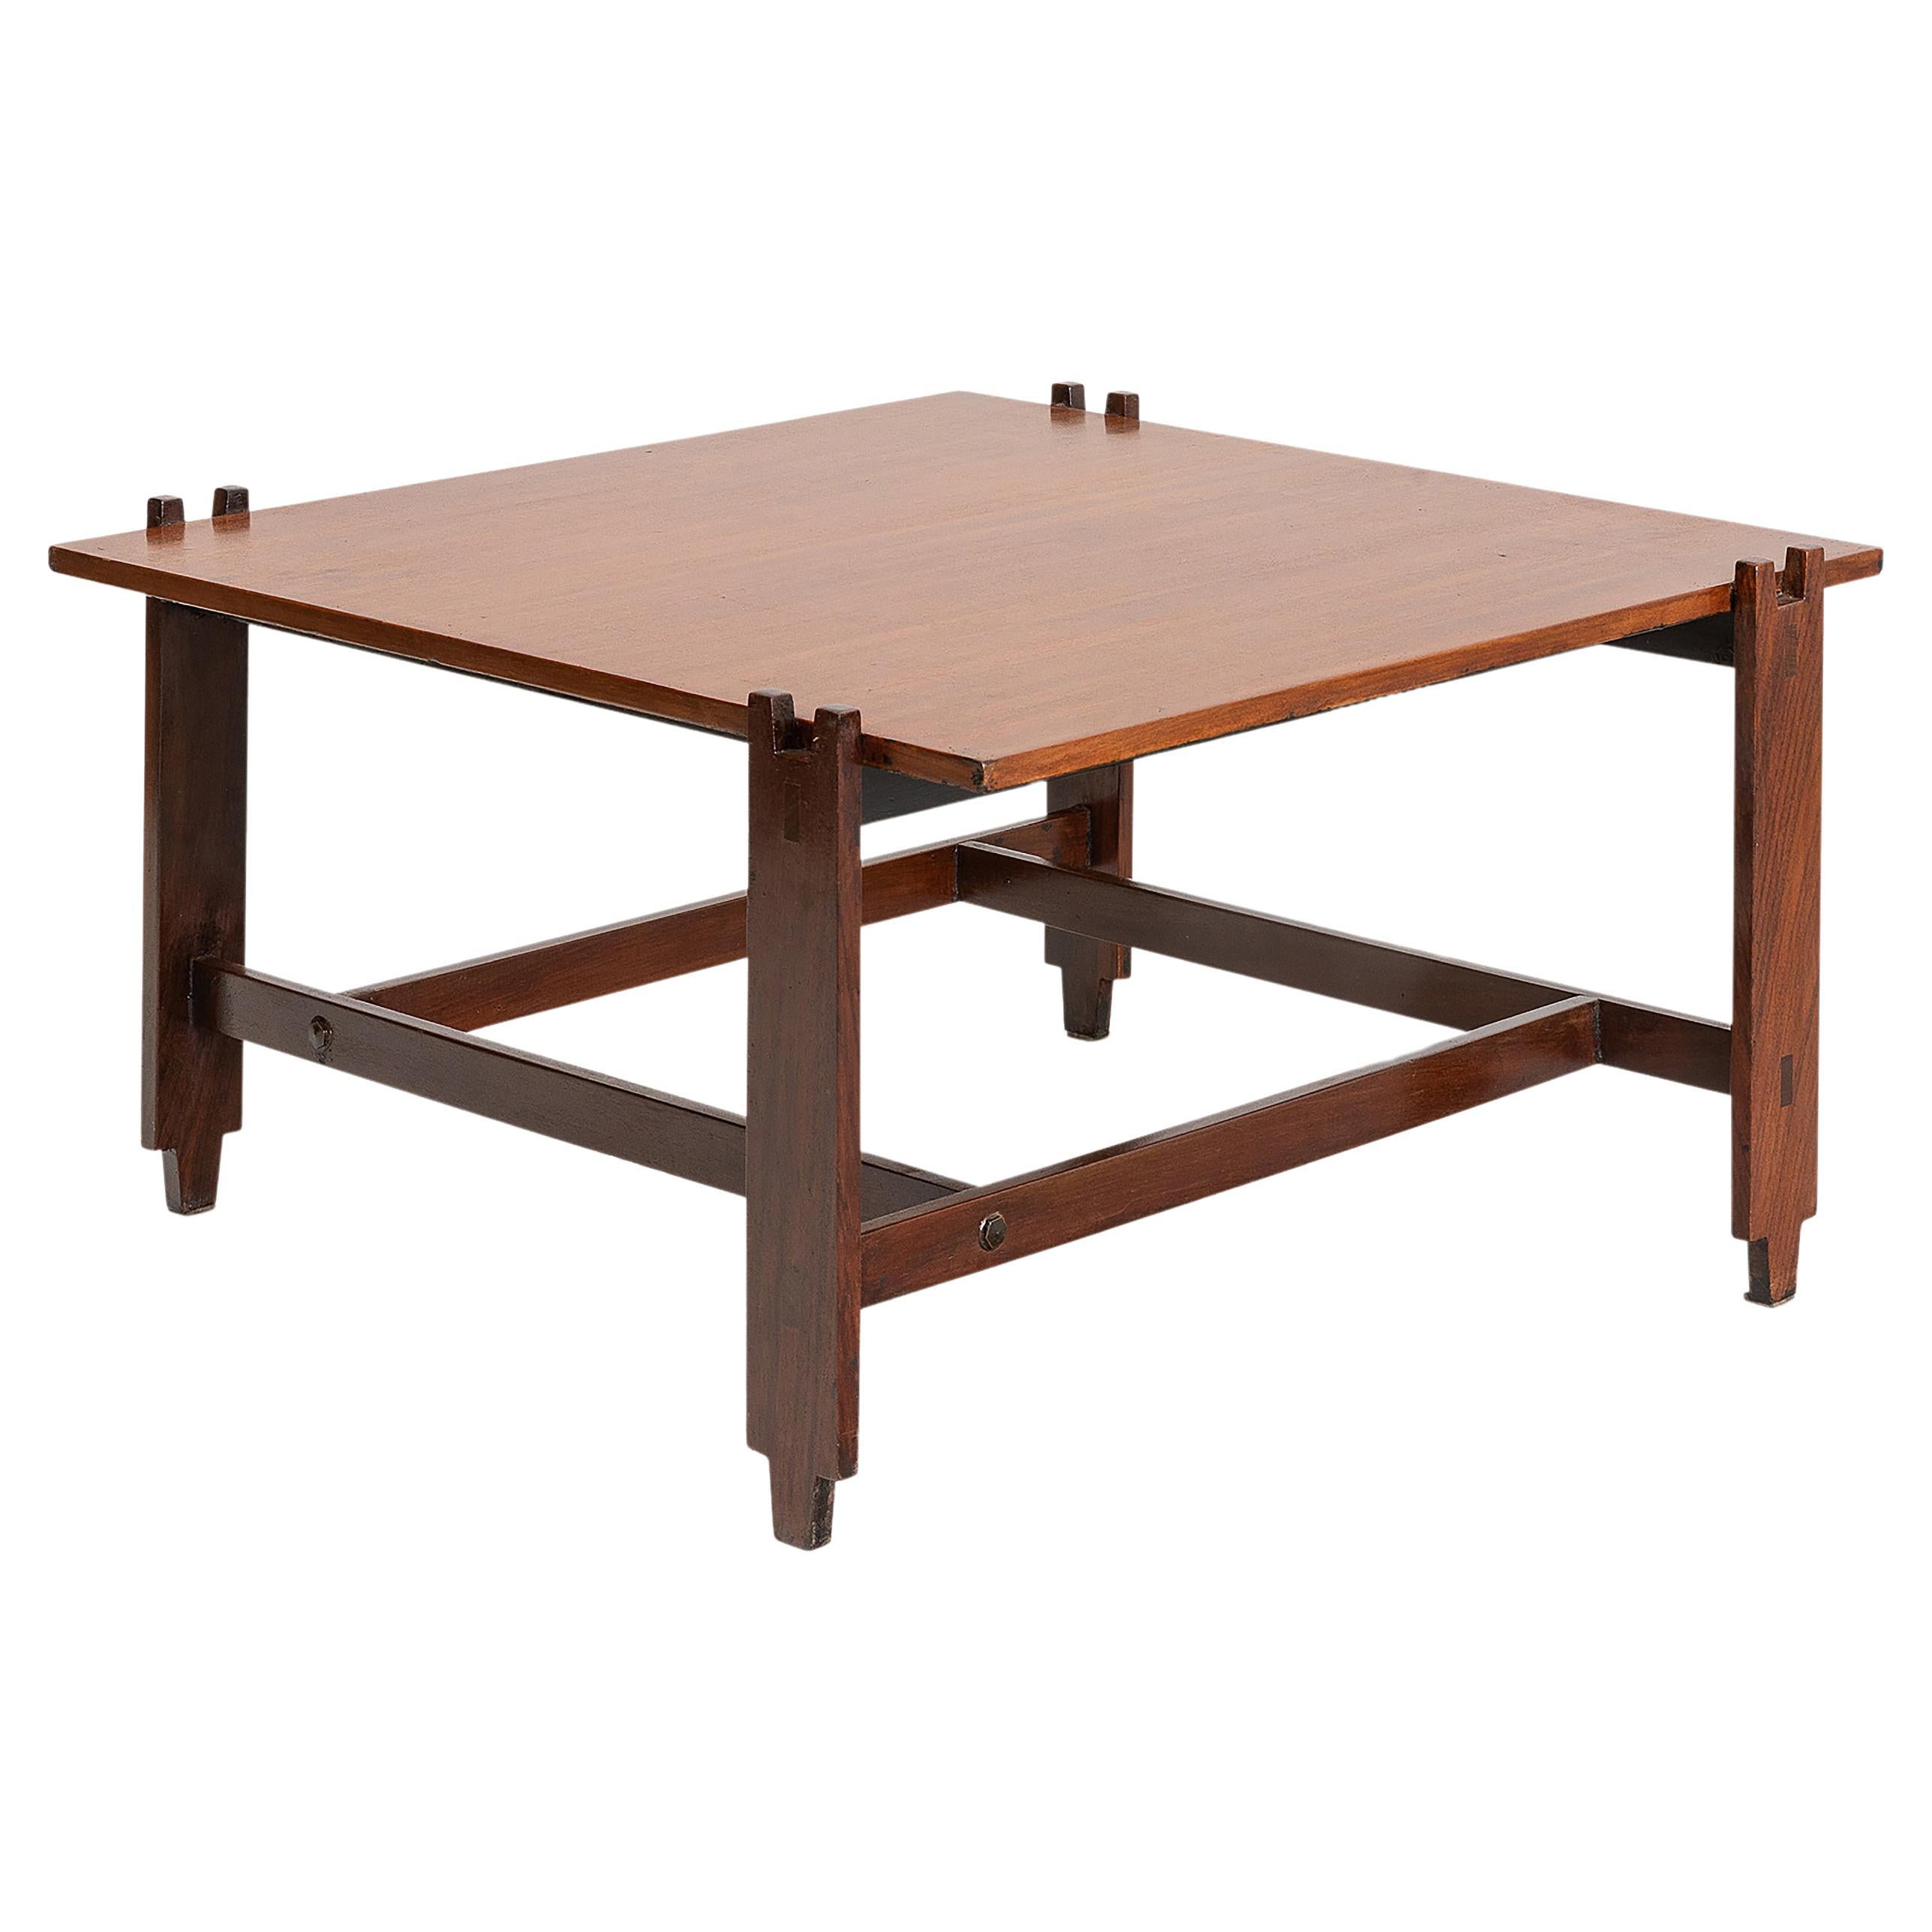 Cassina, Low wooden table, 1960 ca.